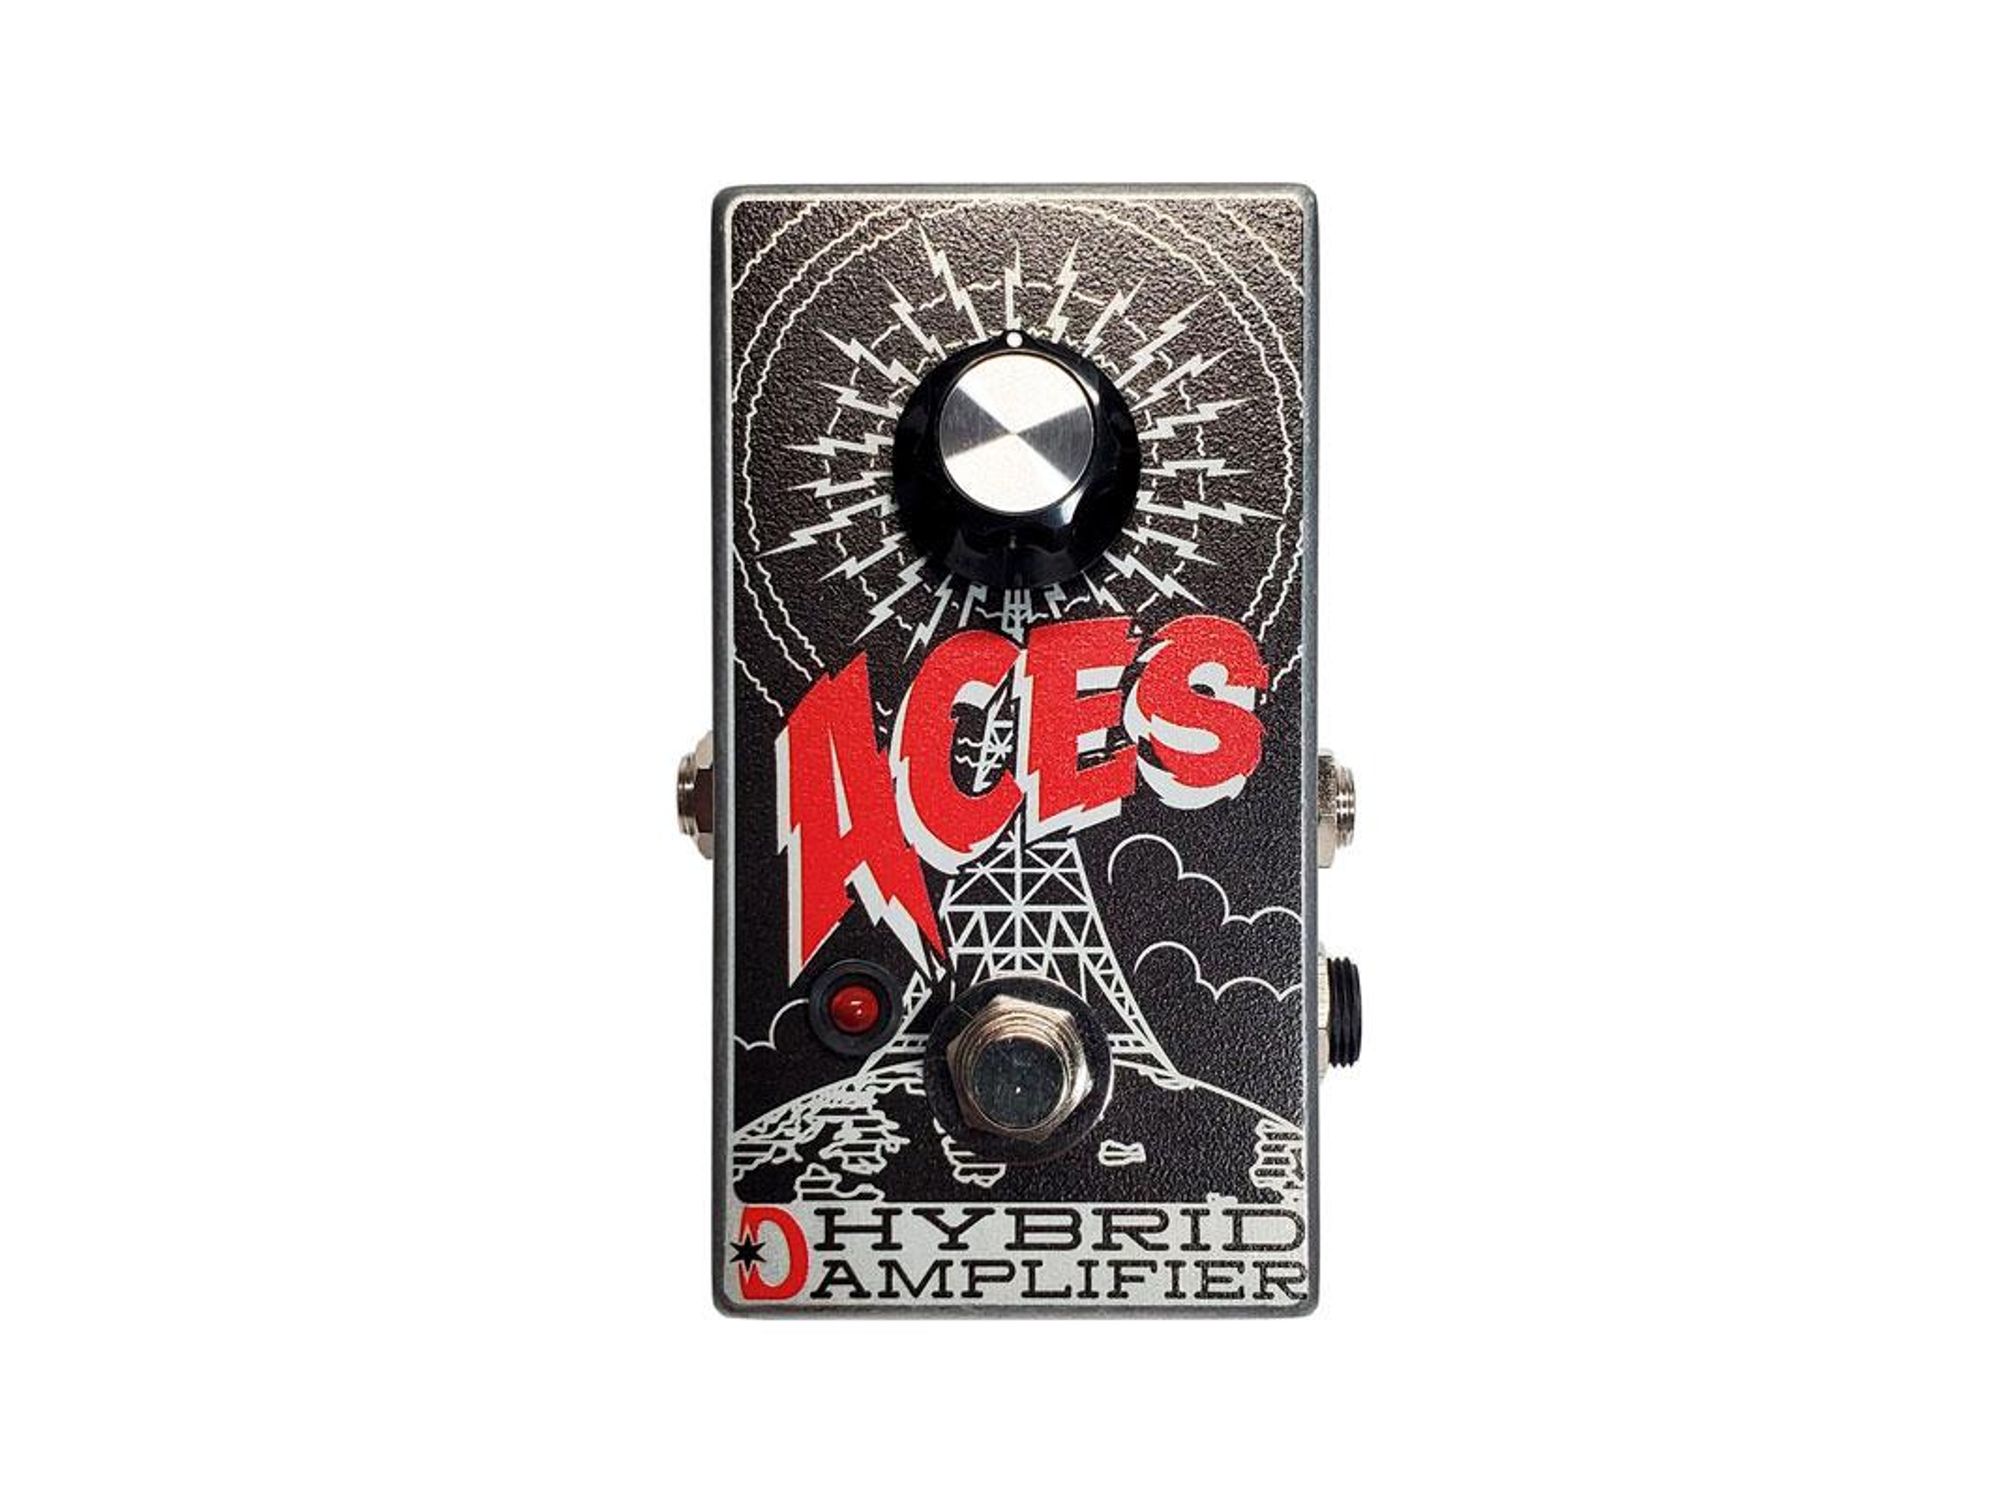 Daredevil Releases the Aces Hybrid Amplifier Pedal